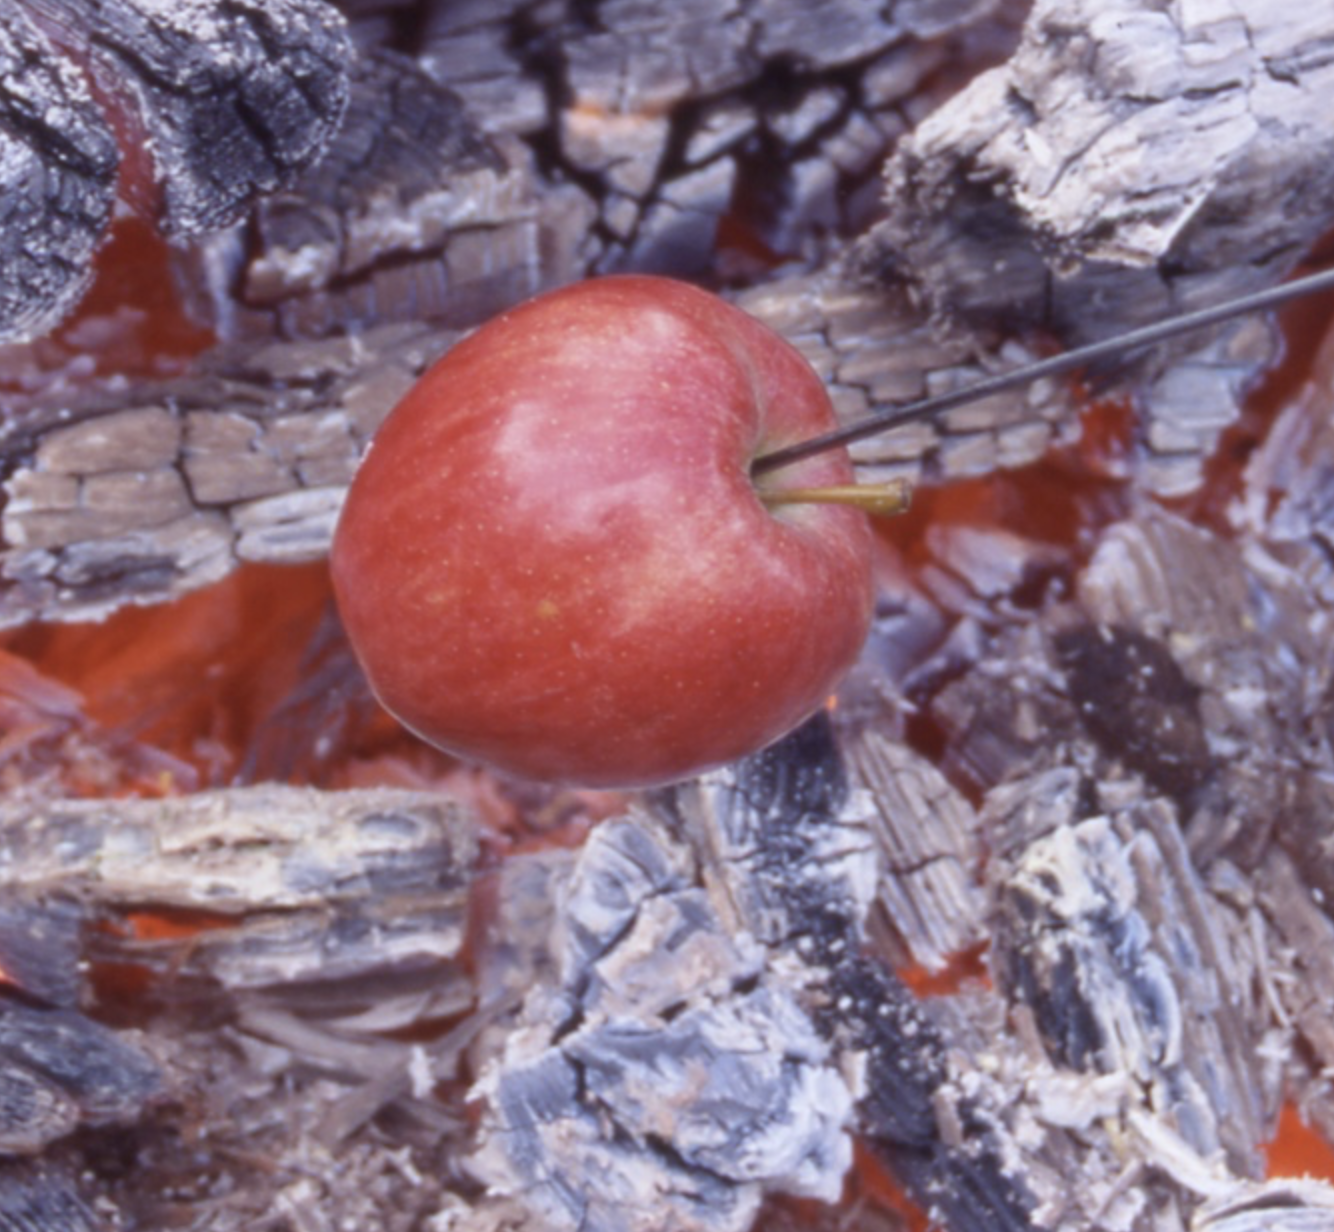 Red apples are perfect for cooking over coals and dipping in cinnamon sugar.